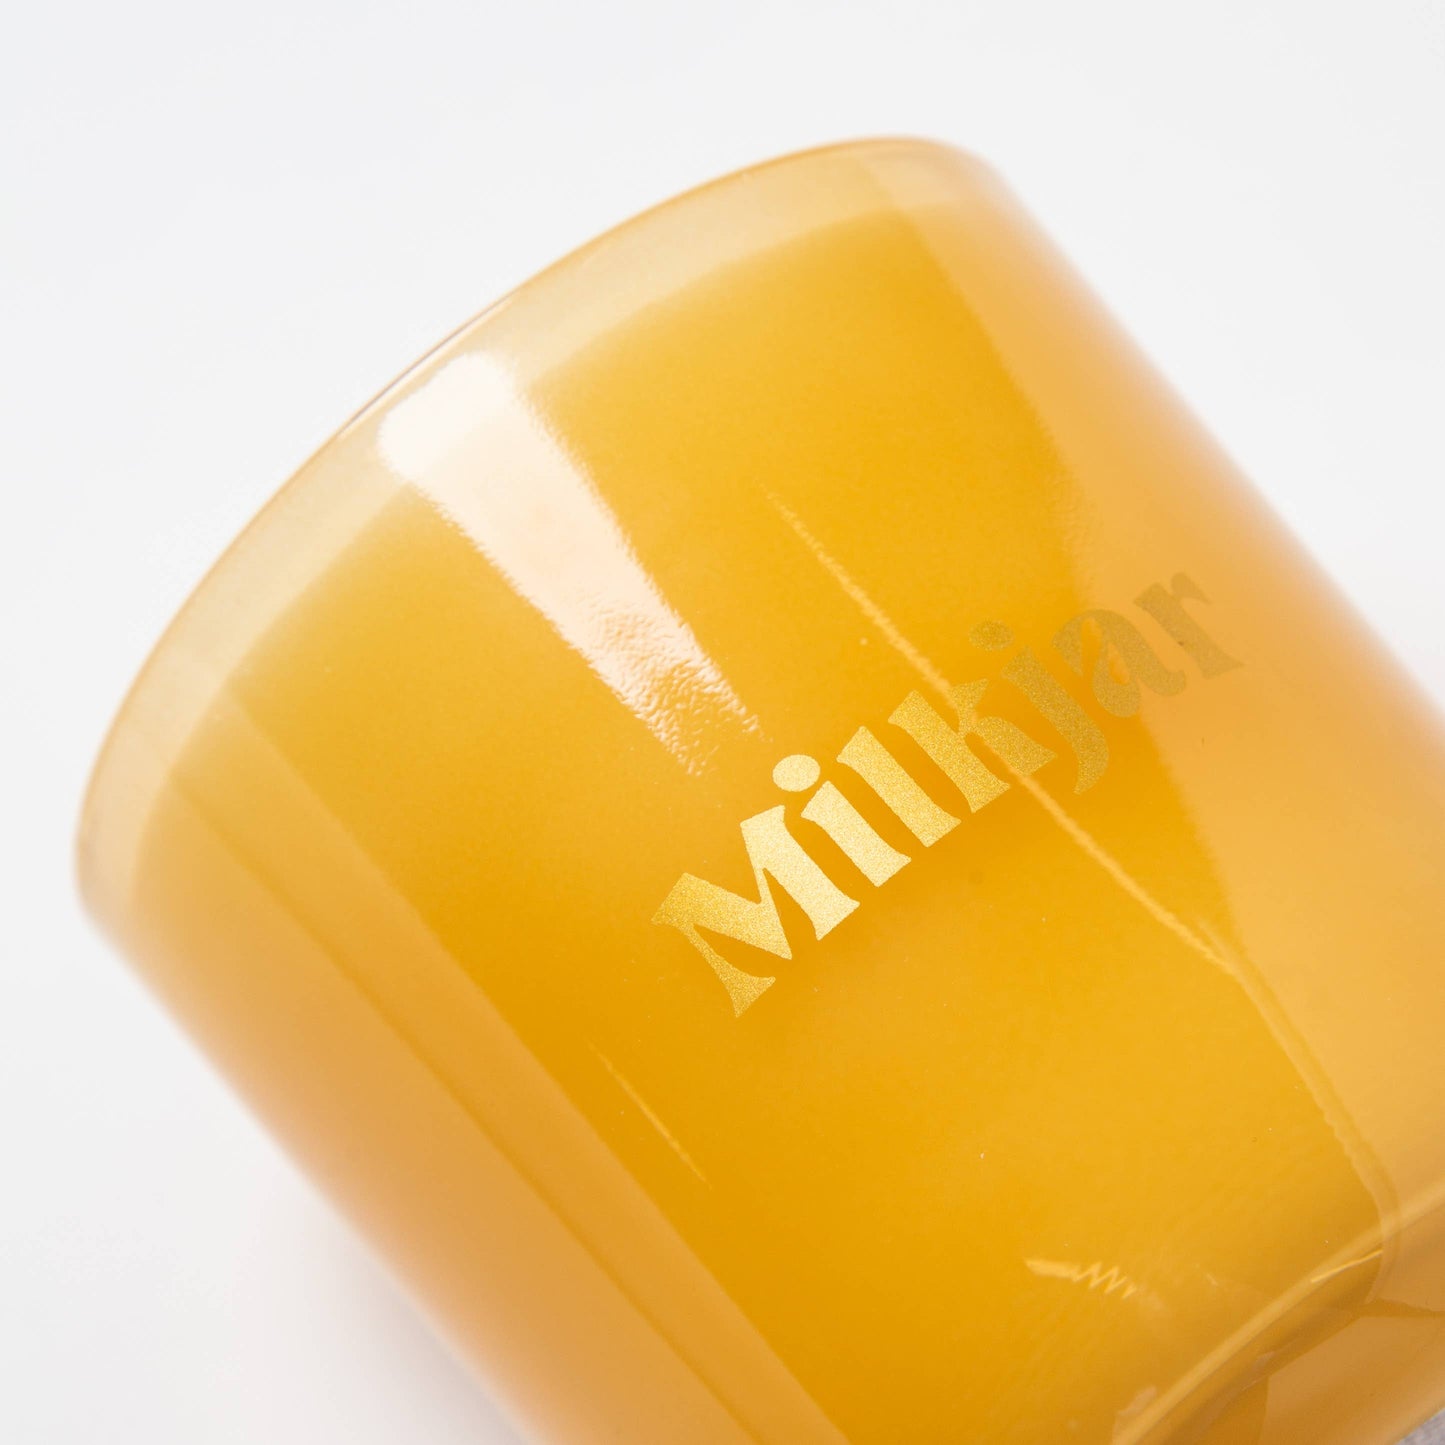 Milk Jar Candle Co. Before Sunrise Scented Candle